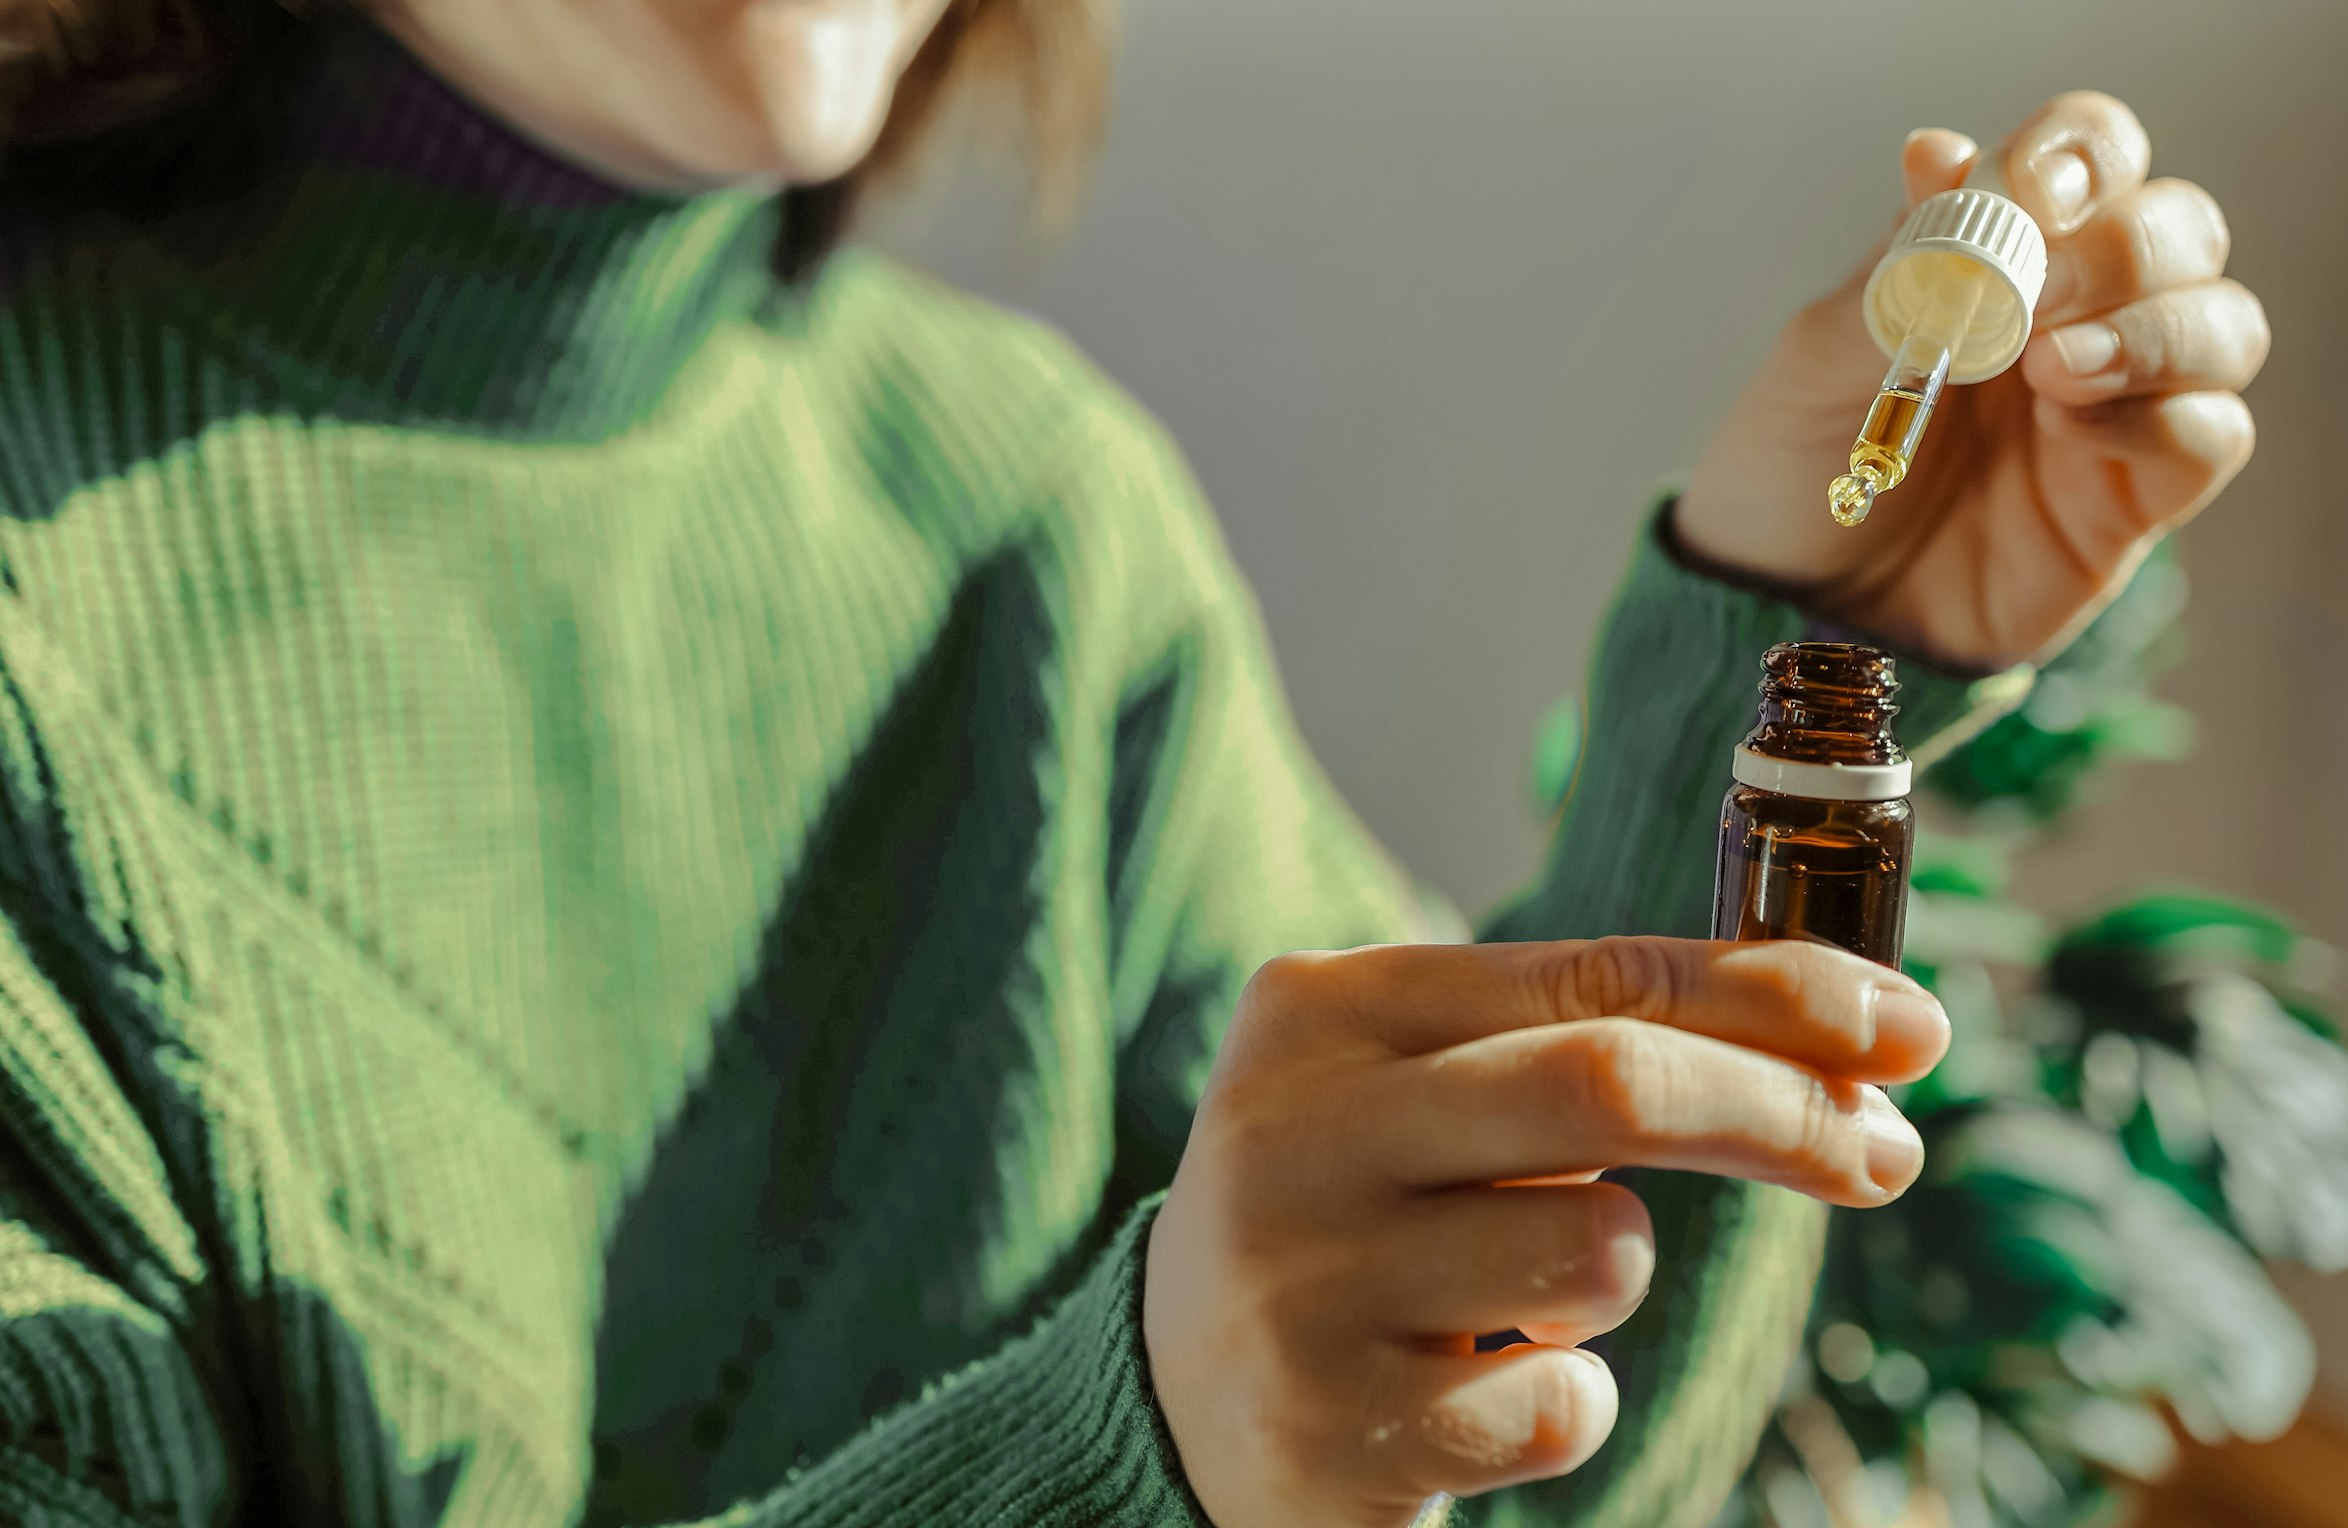 How long does it take to feel the effects of THC oil?